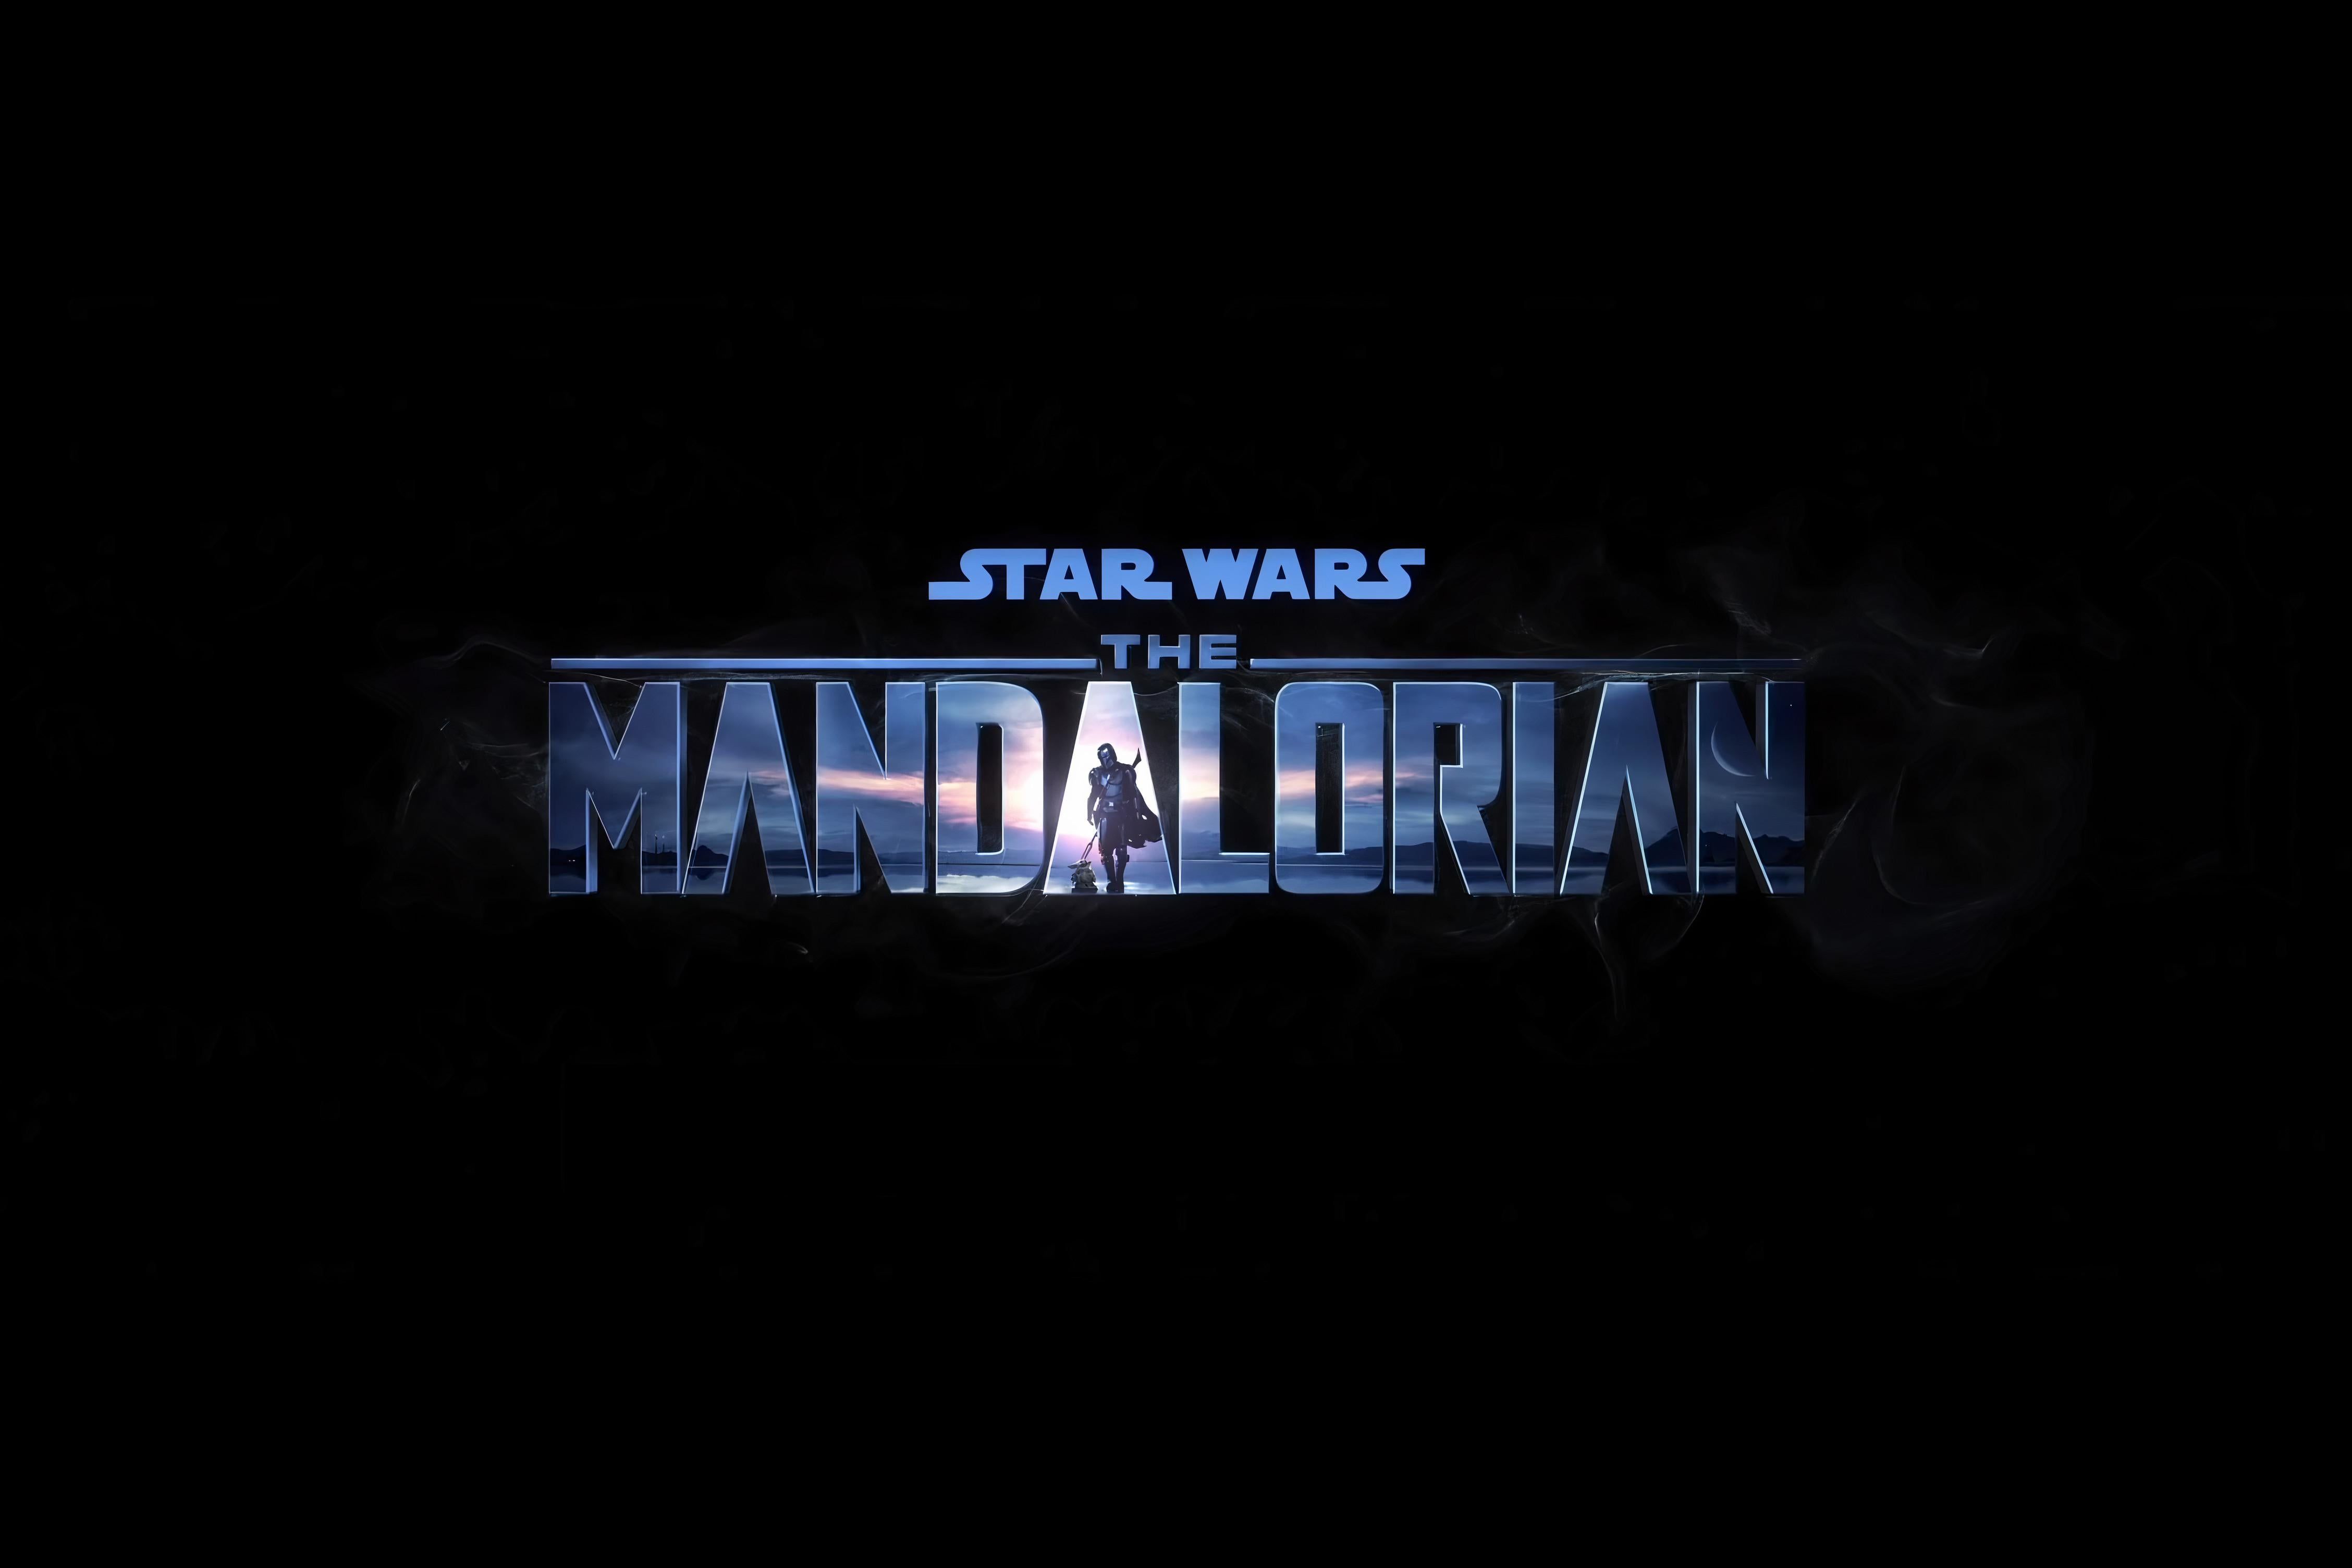 Here's an upscaled Mandalorian Season Two wallpaper (3:2 and 16:9) for y'all